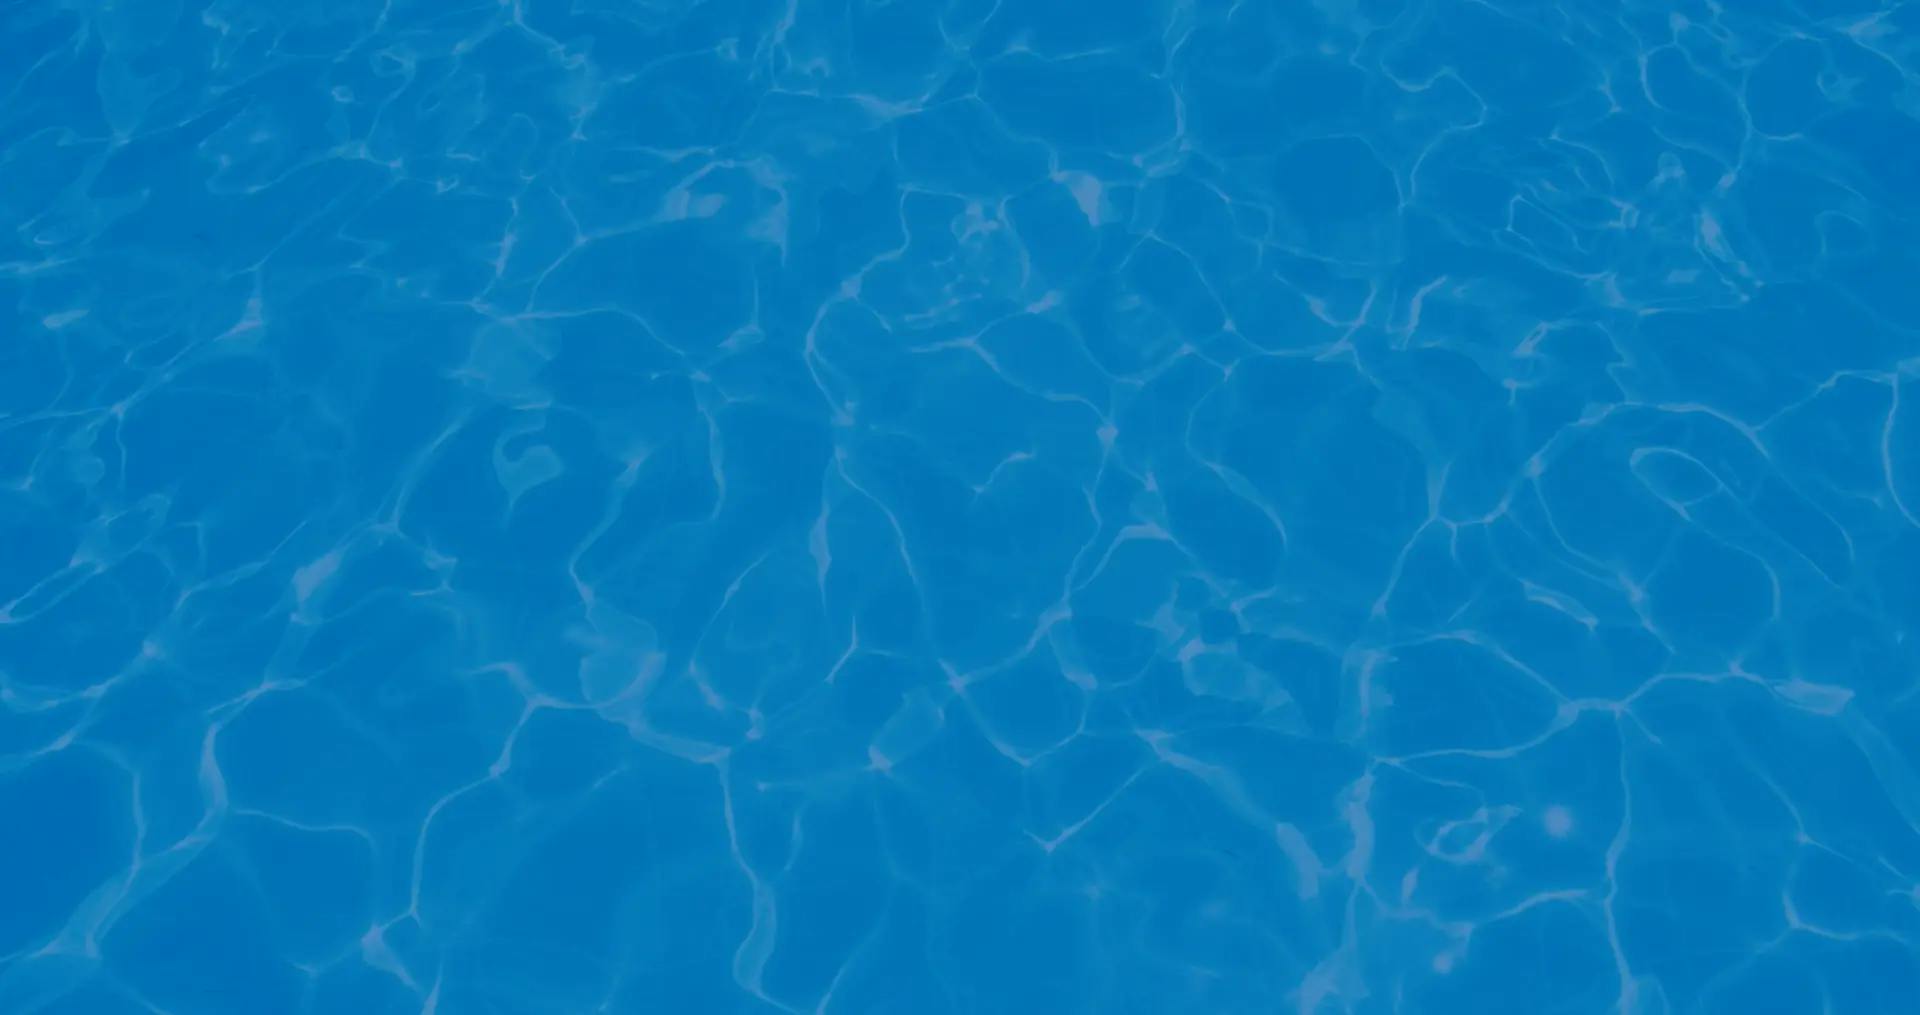 A pool with water texture.